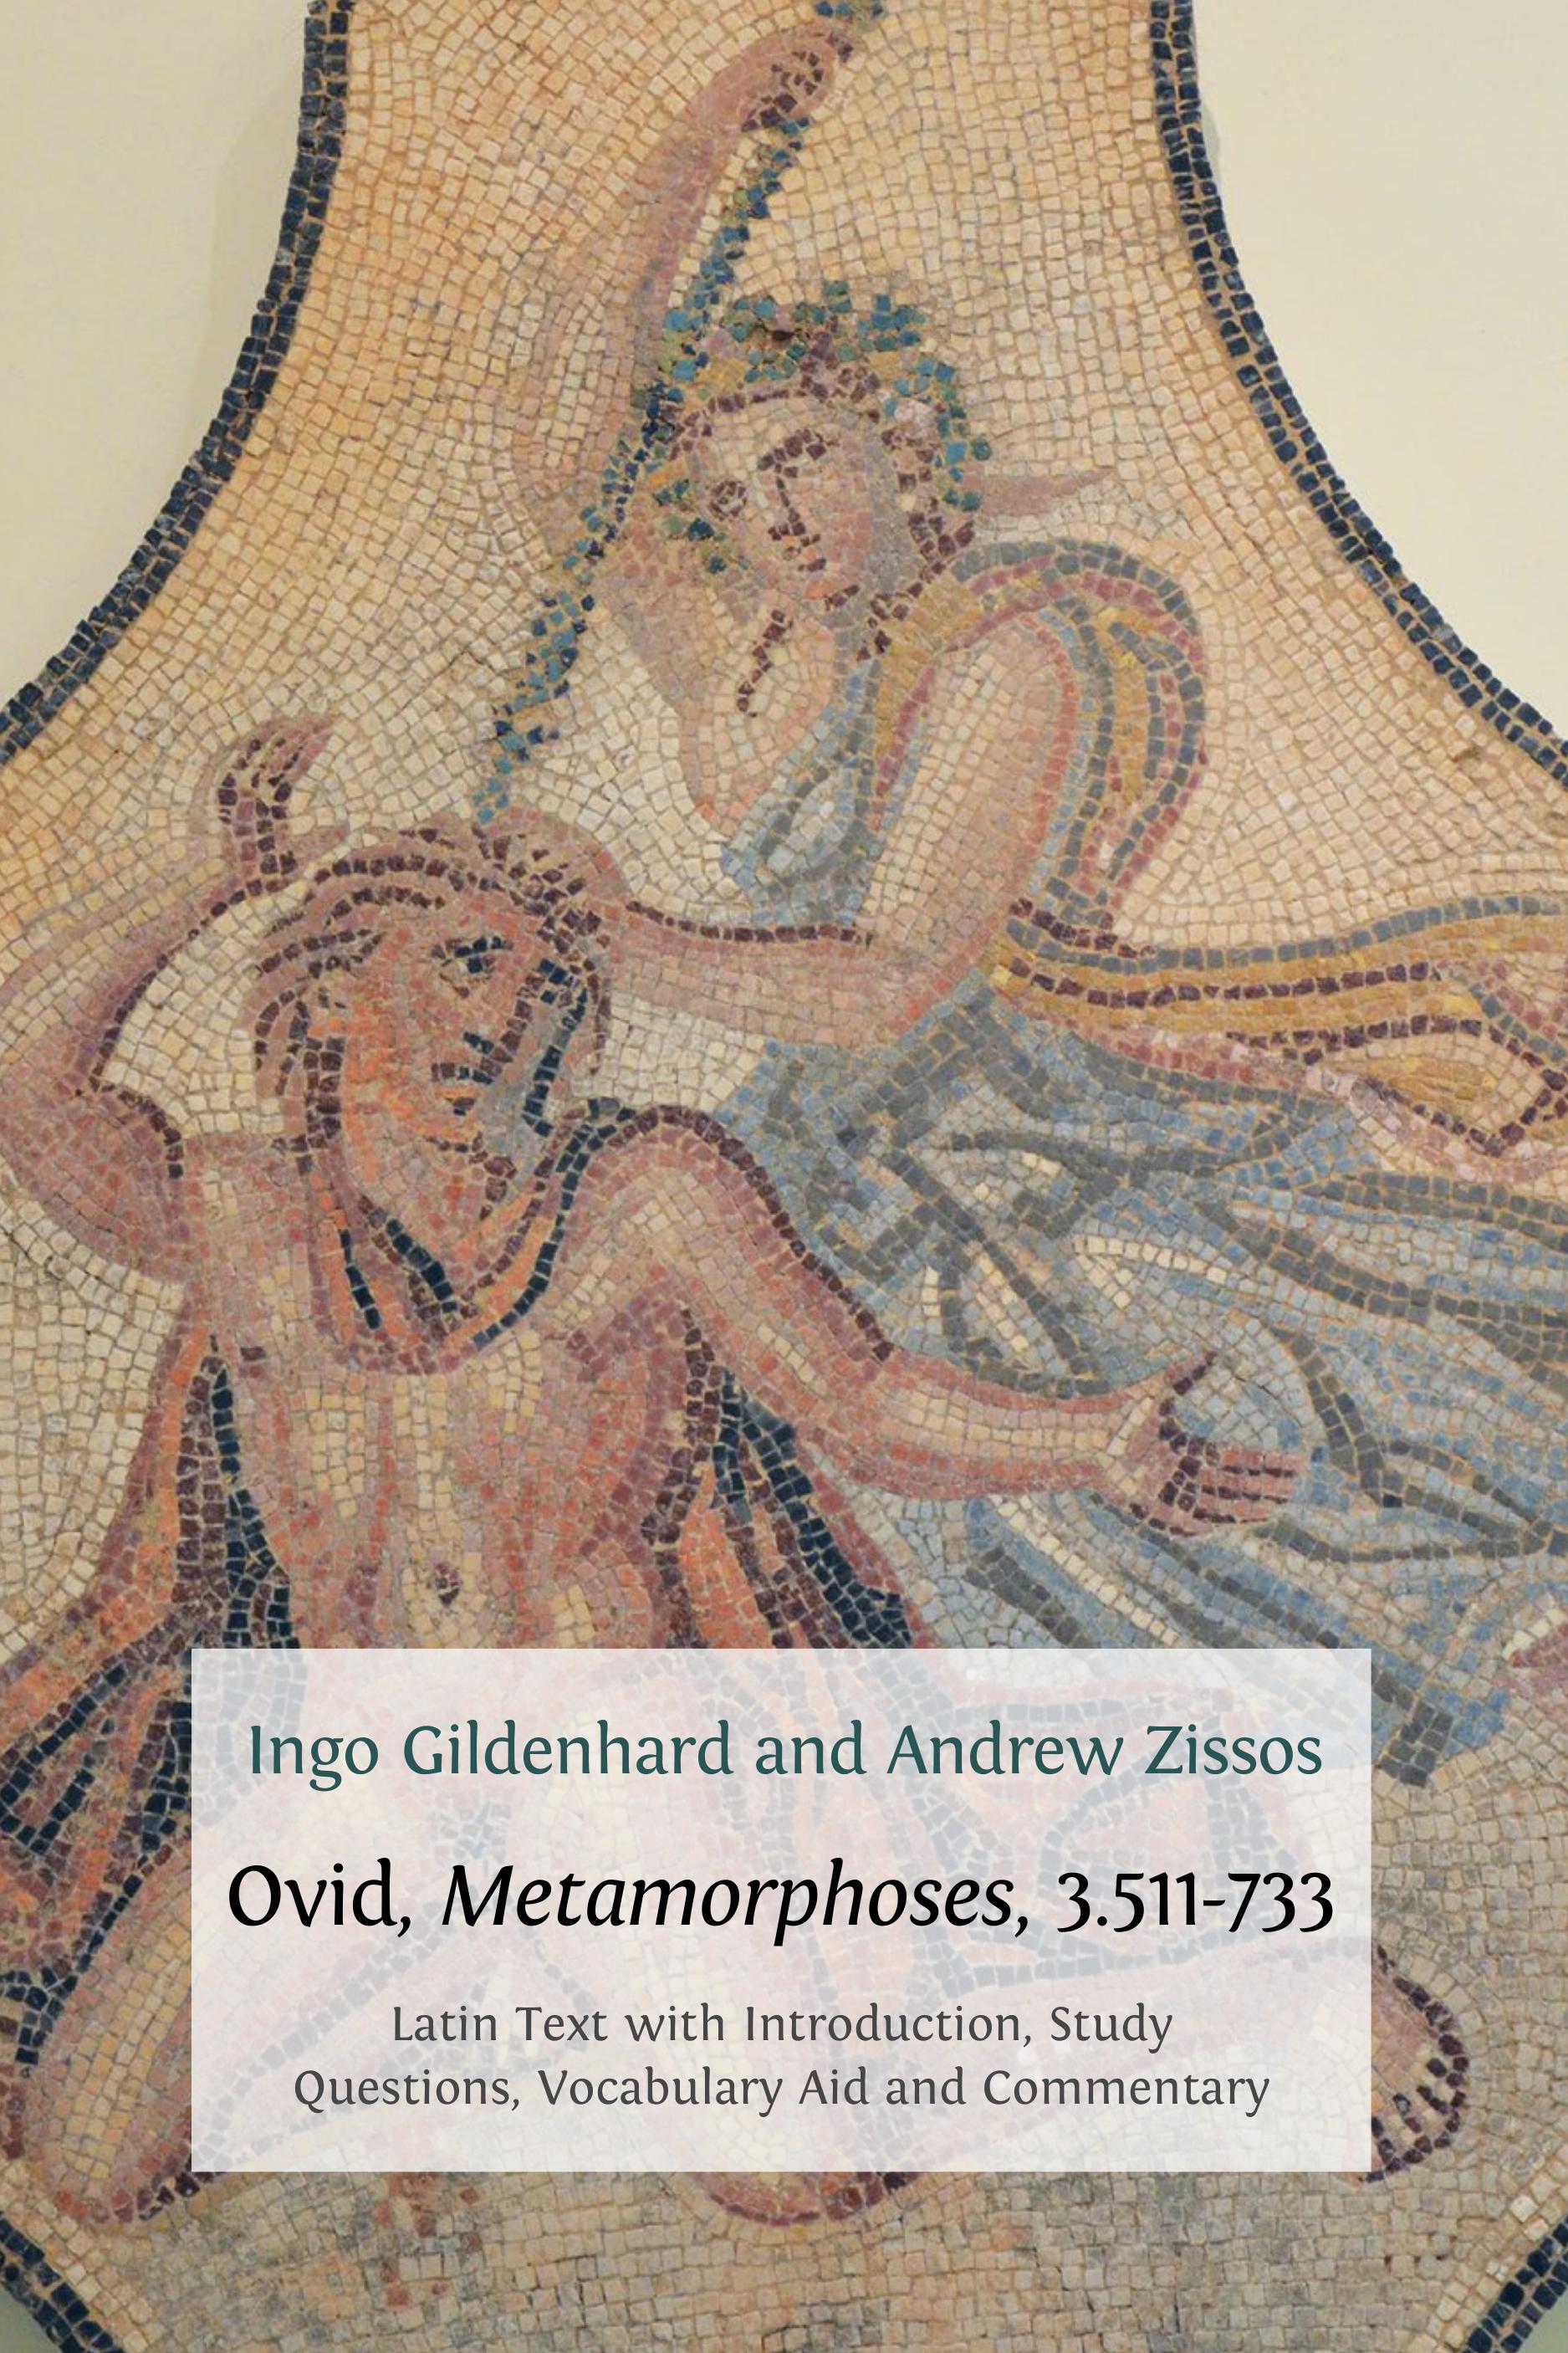 Ovid, Metamorphoses, 3.511-733. Latin Text with Introduction, Commentary, Glossary of Terms, Vocabulary Aid and Study Questions